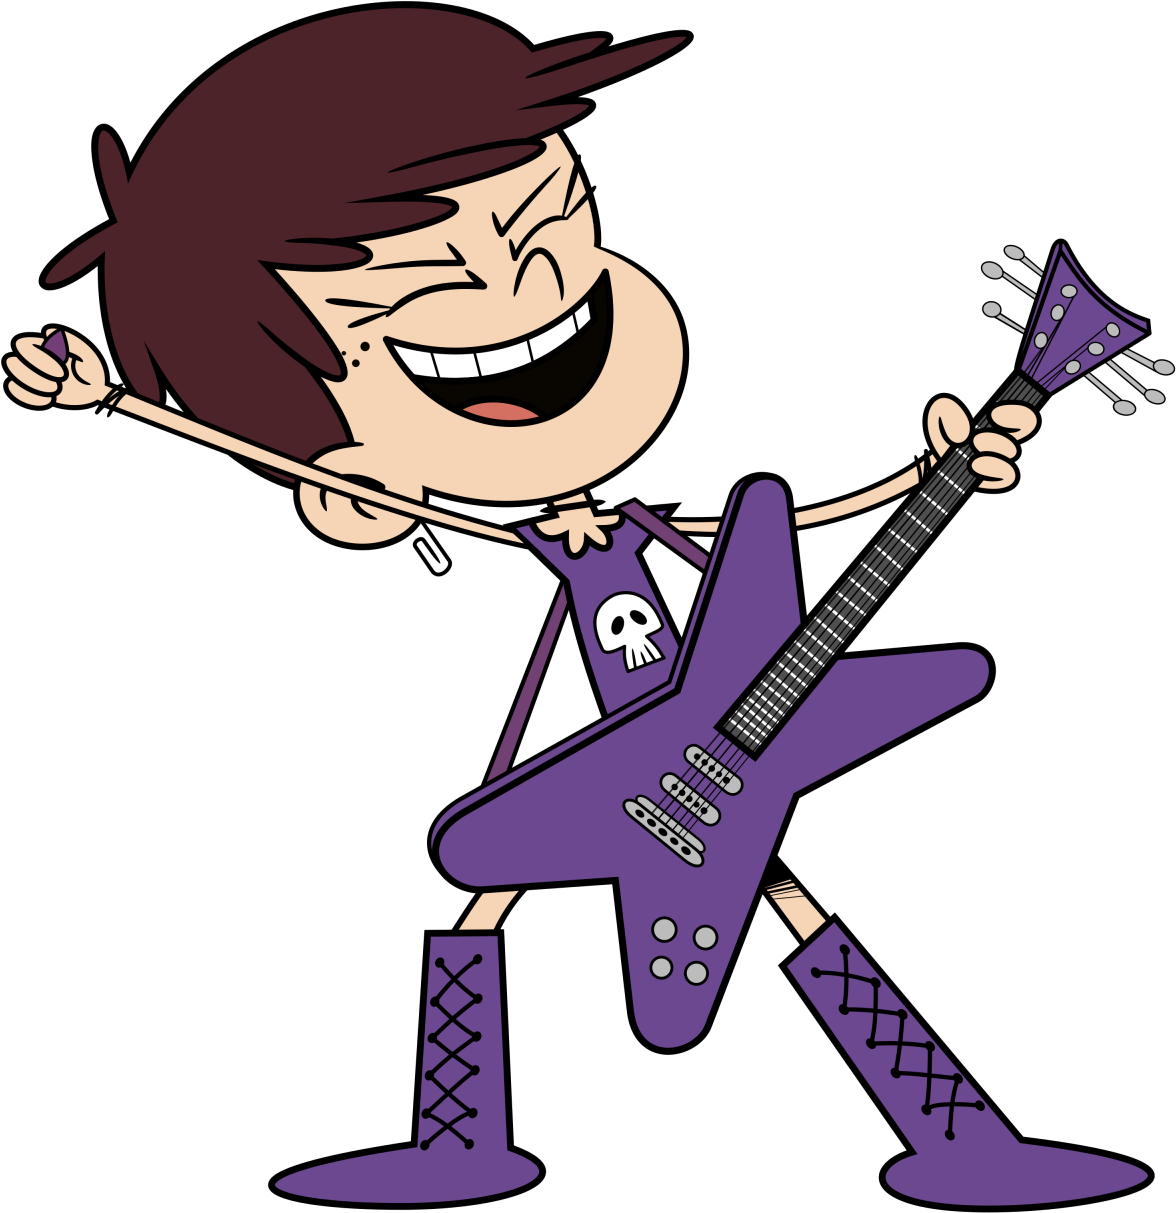 Download and share clipart about The Loud House Luna Loud Loud House Season...